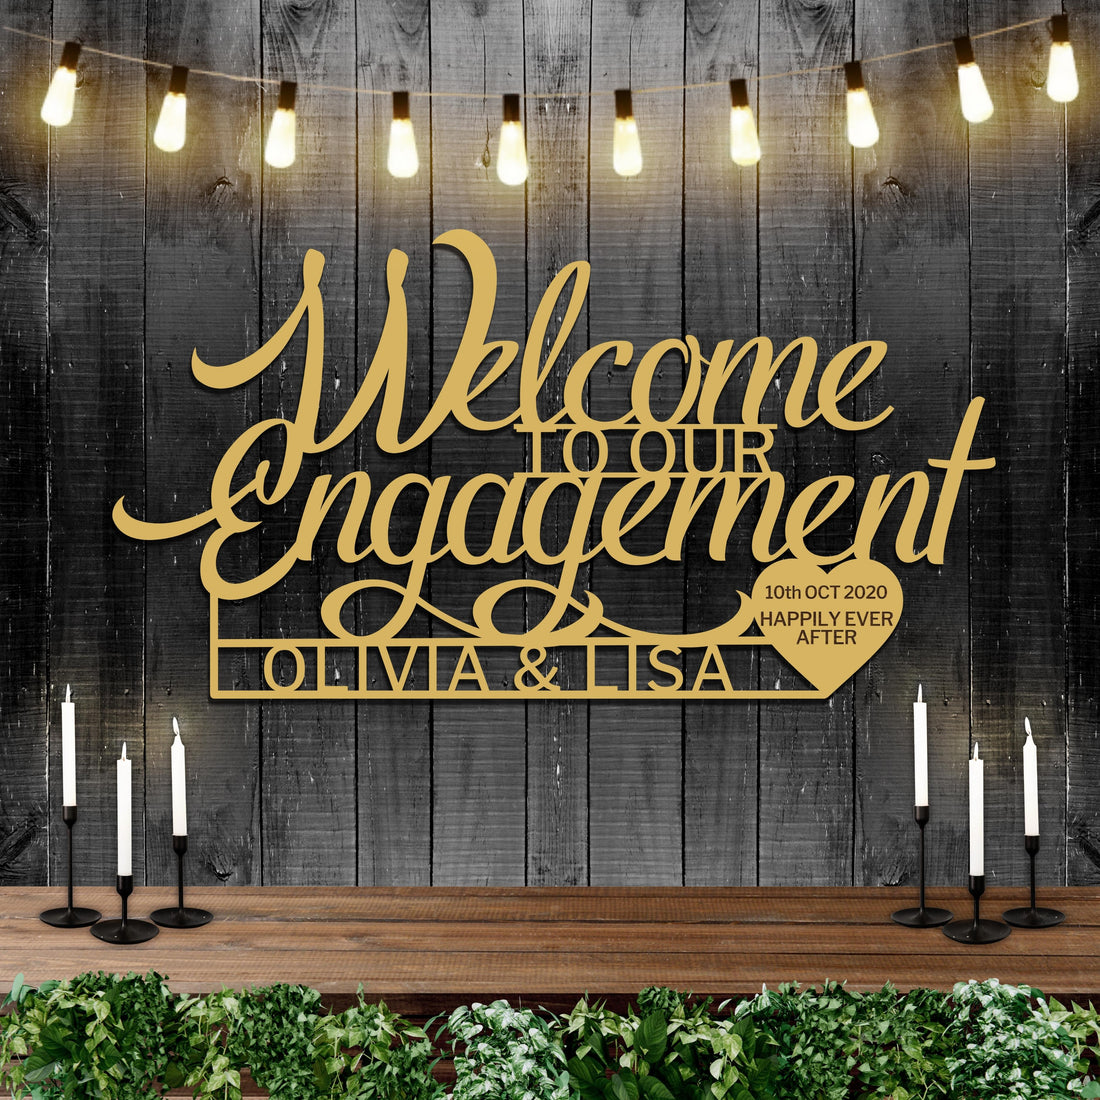 Custom Wooden/ Acrylic Welcome To Our Engagement Sign, Personalised Name & Date Wedding Signage, Hedge Photo Prop, Event Wall Hoop, Bridal Shower, Anniversary, Stag Hens Party, Birthday Backdrop Decor